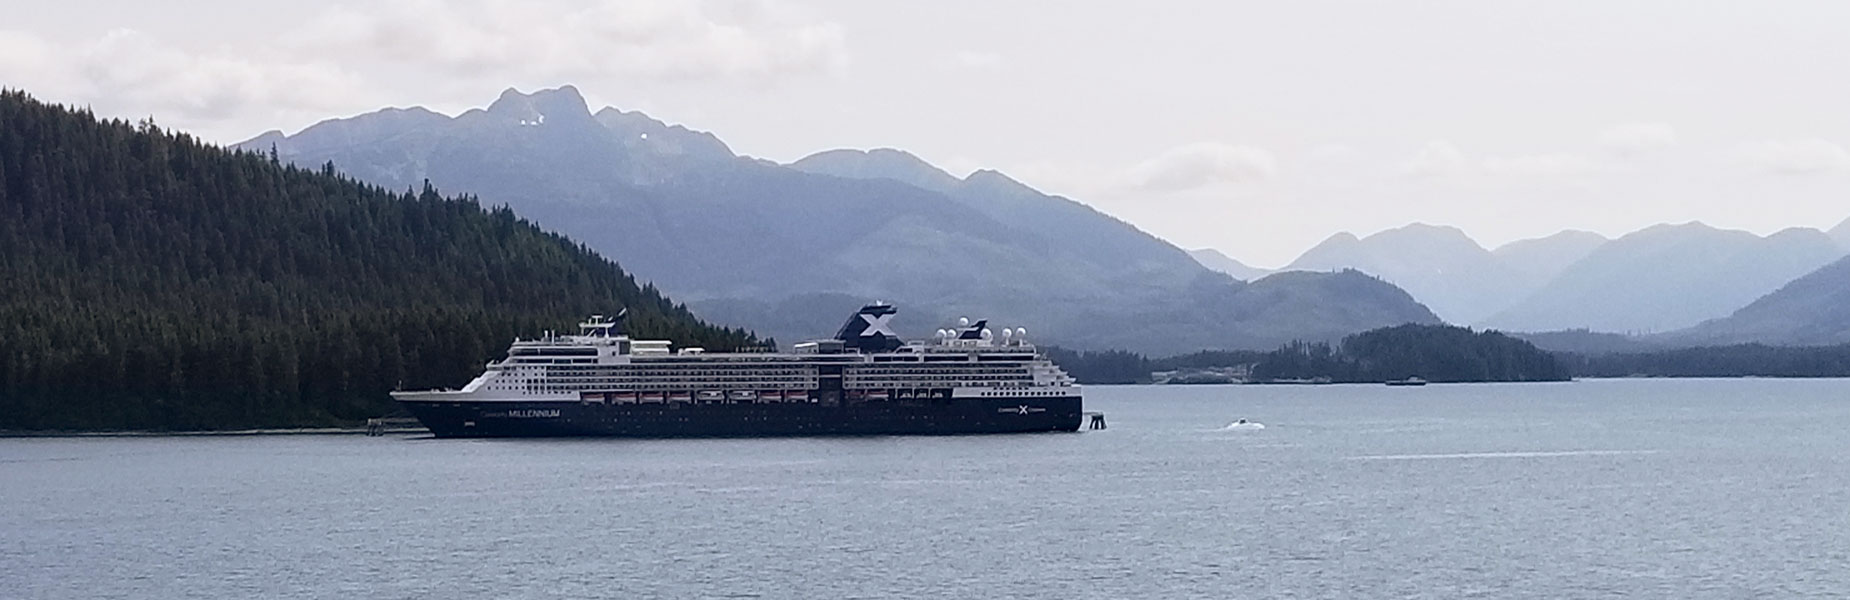 Icy Straight and Hoonah Alaska are popular Alaskan cruise ship destinations, with whale watching tours being at the top of the to-do list for visitors!